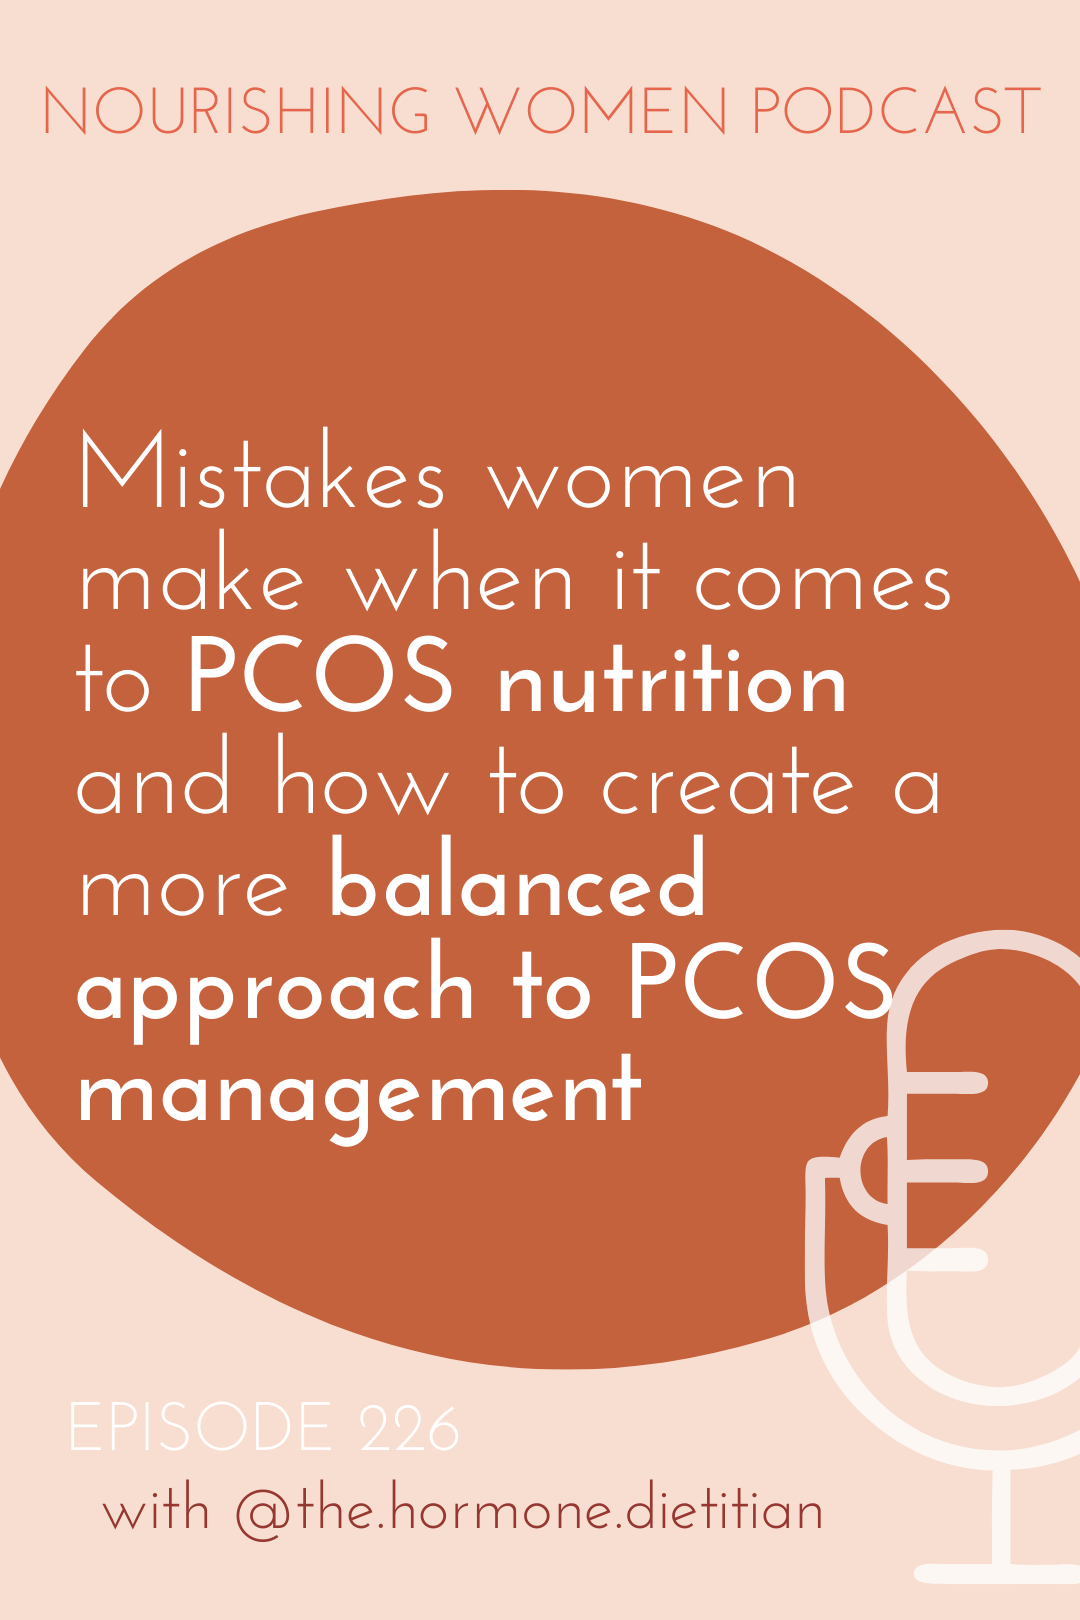 NWP Episode 226: A Balanced Approach to PCOS with Melissa Groves